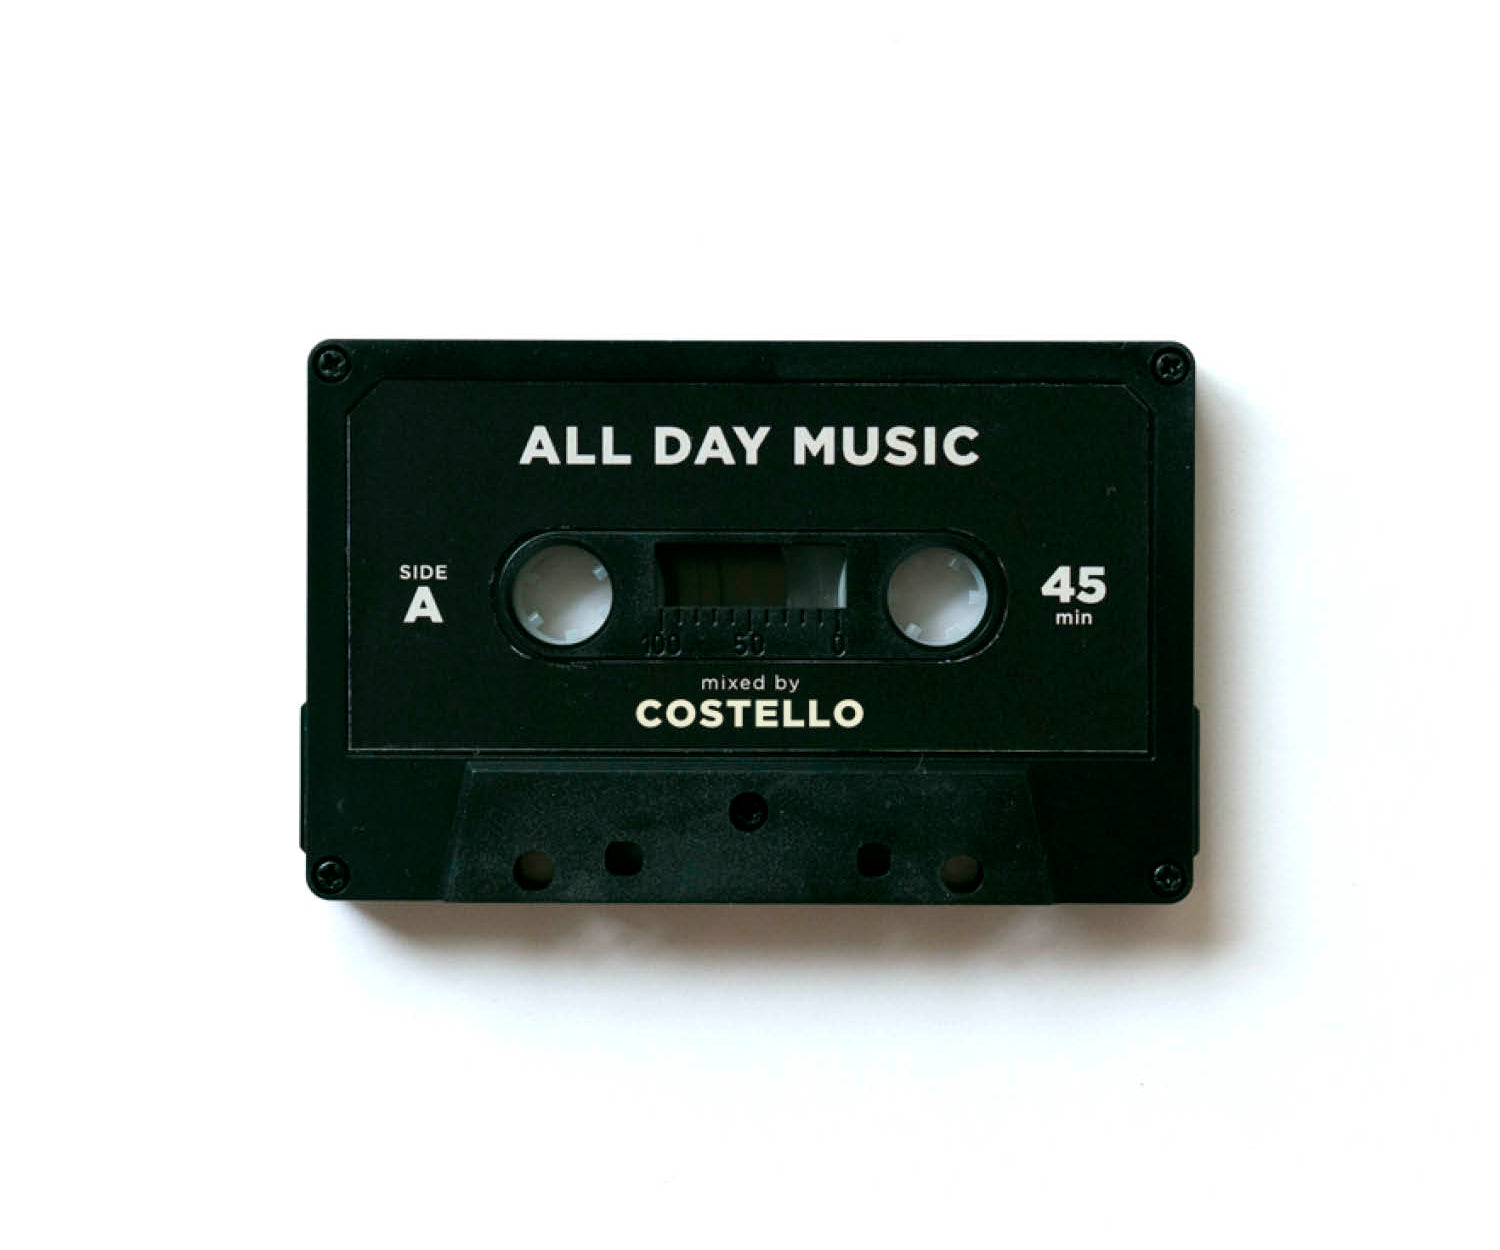 A.D.M. #8 - Mixed by COSTELLO | LIKE THIS SHOP